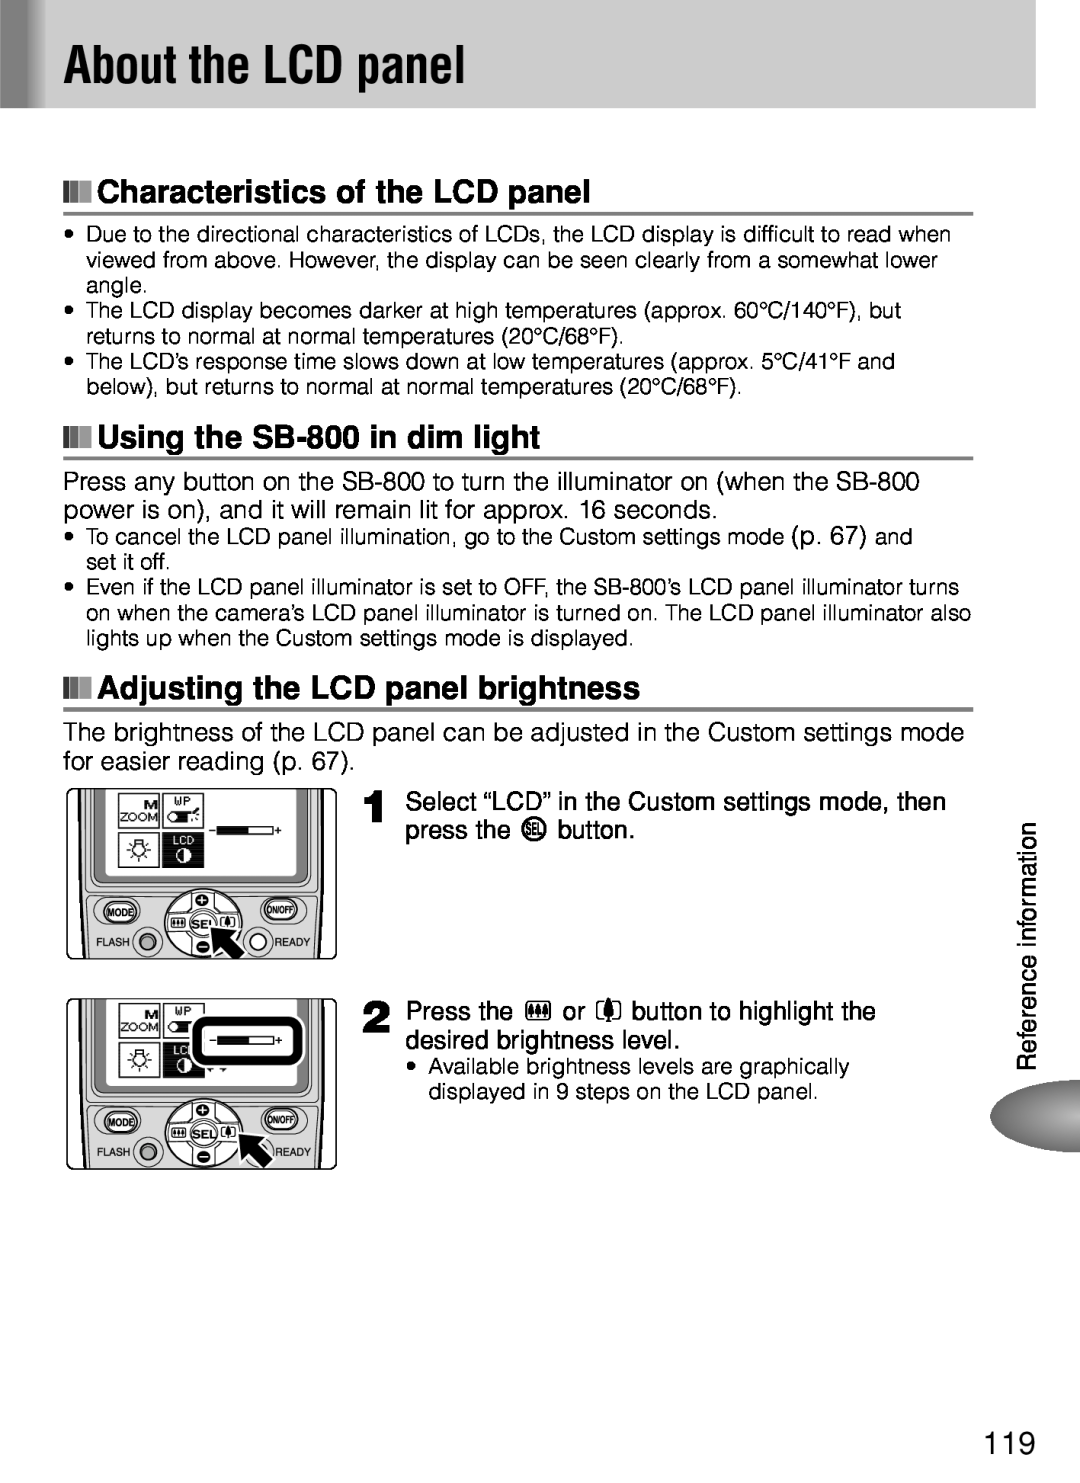 Nikon instruction manual About the LCD panel, Characteristics of the LCD panel, Using the SB-800 in dim light 